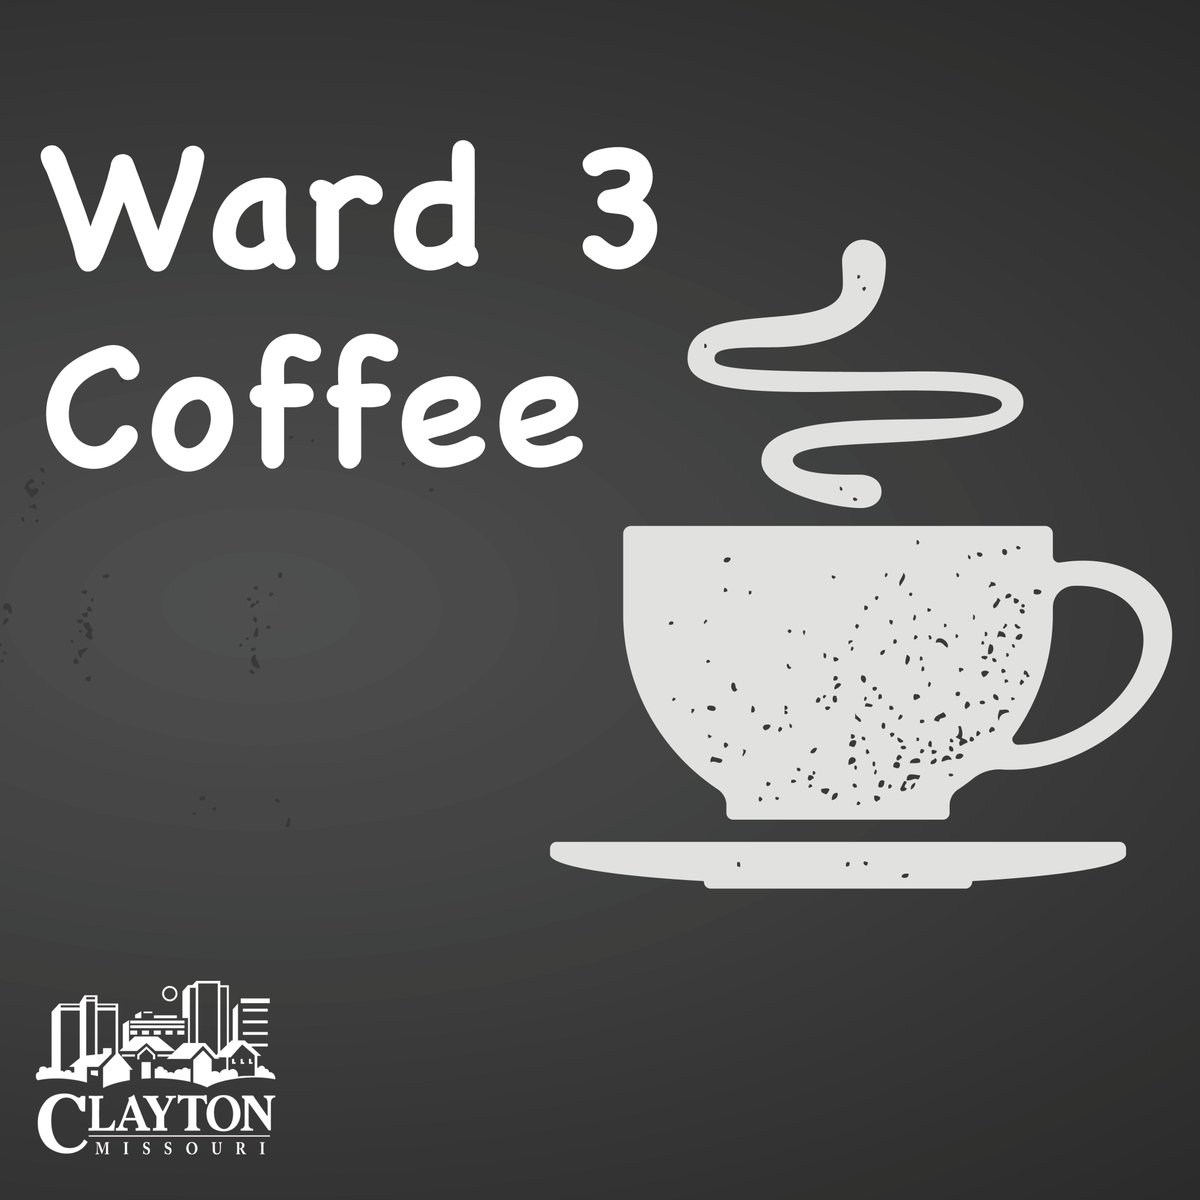 Mark your calendars for the Ward 3 Coffee event on February 17! Join your Ward 3 aldermen, Bridget McAndrew and Gary Feder, for community conversation at the Starbucks on Central at 10:00 a.m. claytonmo.gov/Home/Component…